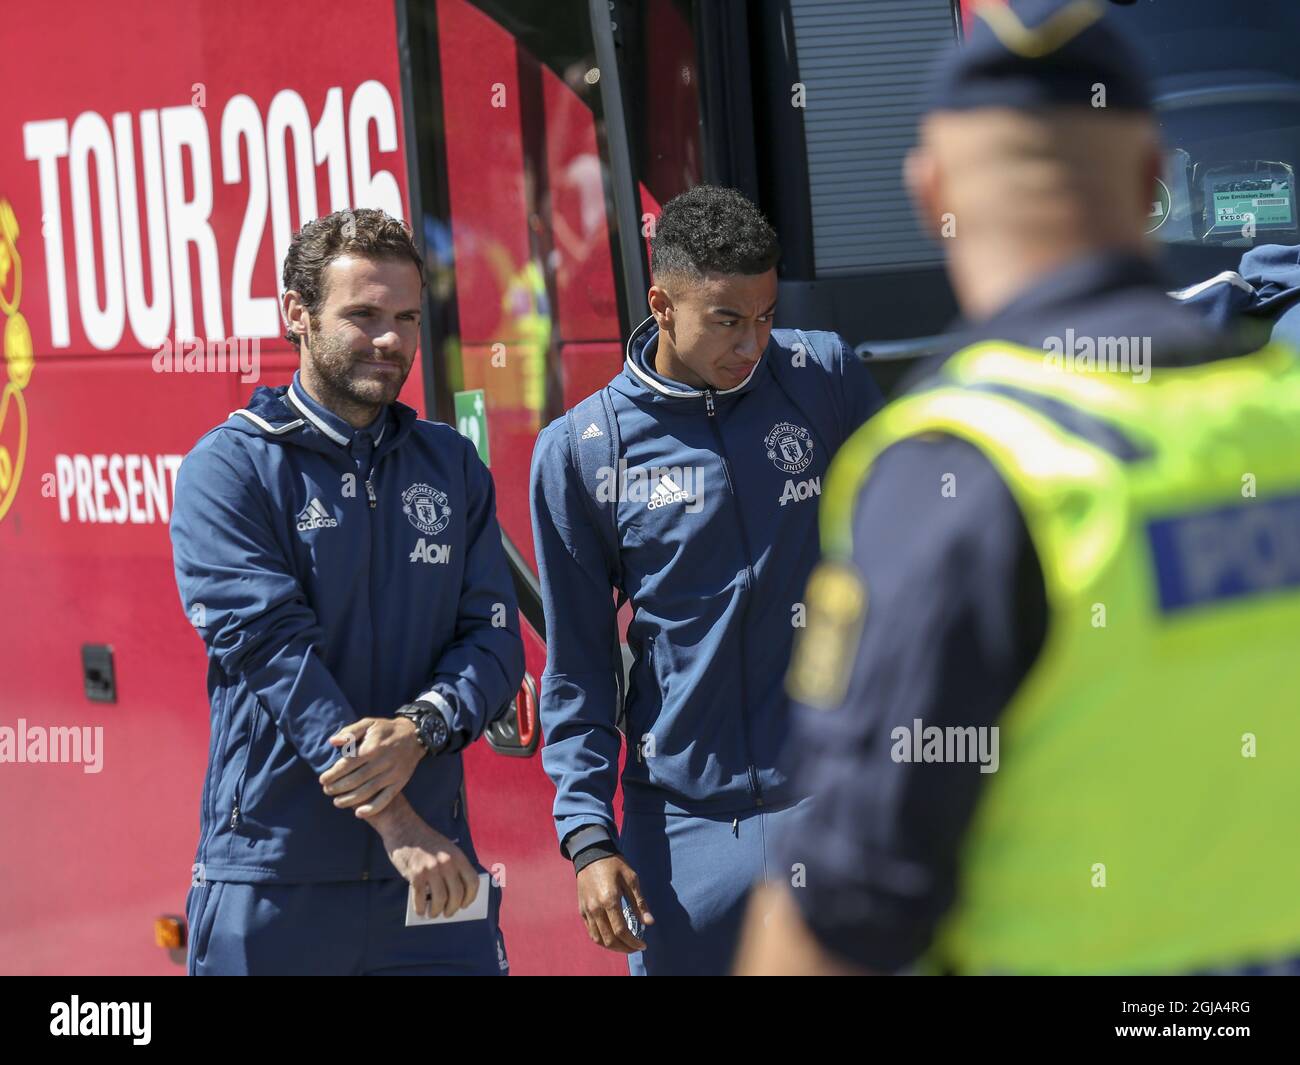 Manchester United's midfielders Juan Mata and Jesse Lingard exit the team coach at the hotel in Goteborg on July 30, 2016. The Manchester team will meet Turkey's Galatasaray in a friendly in Goteborg Saturday, July 30, 2016. Photo Bjorn Larsson Rosvall / TT / code 9200  Stock Photo